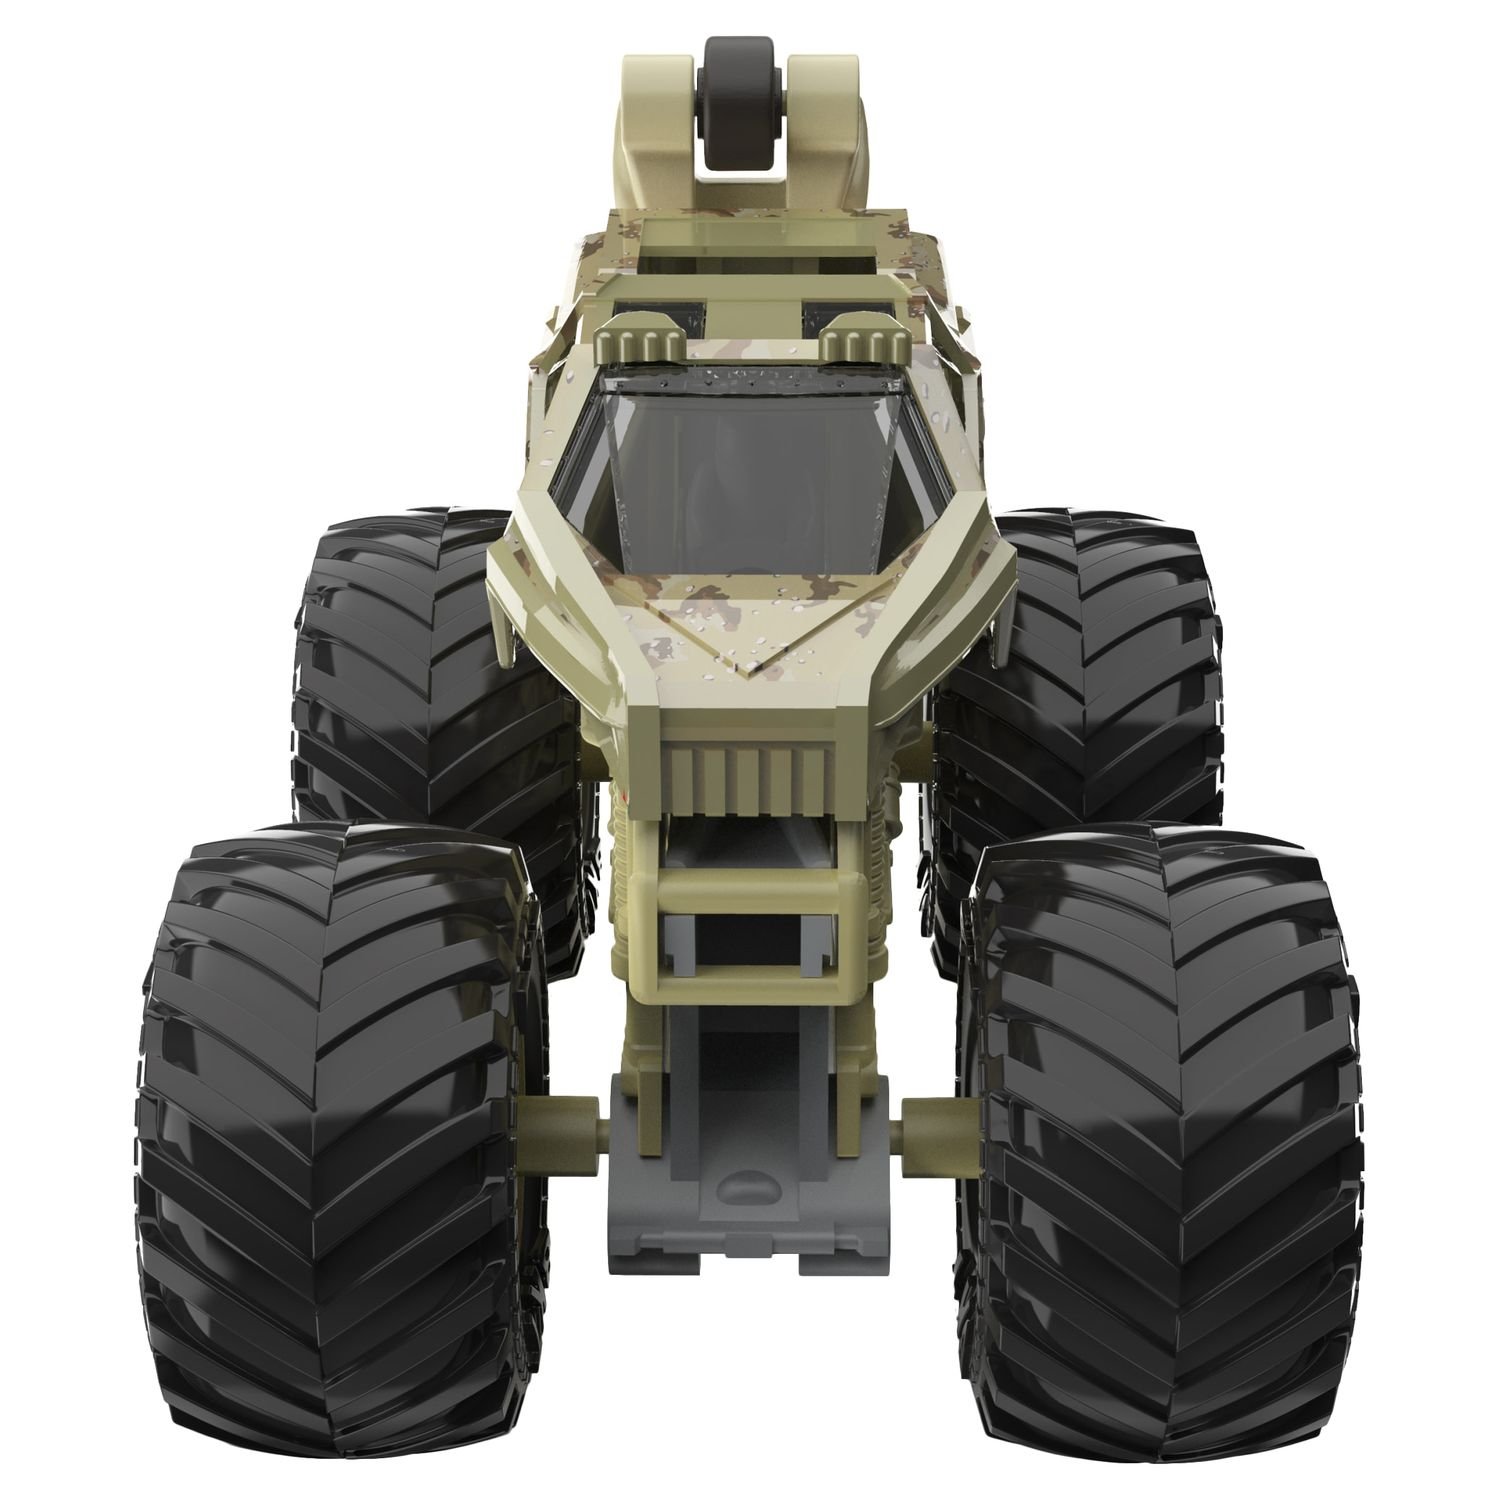 Машинка Monster Jam 1:64 Soldier of Fortune 6060868